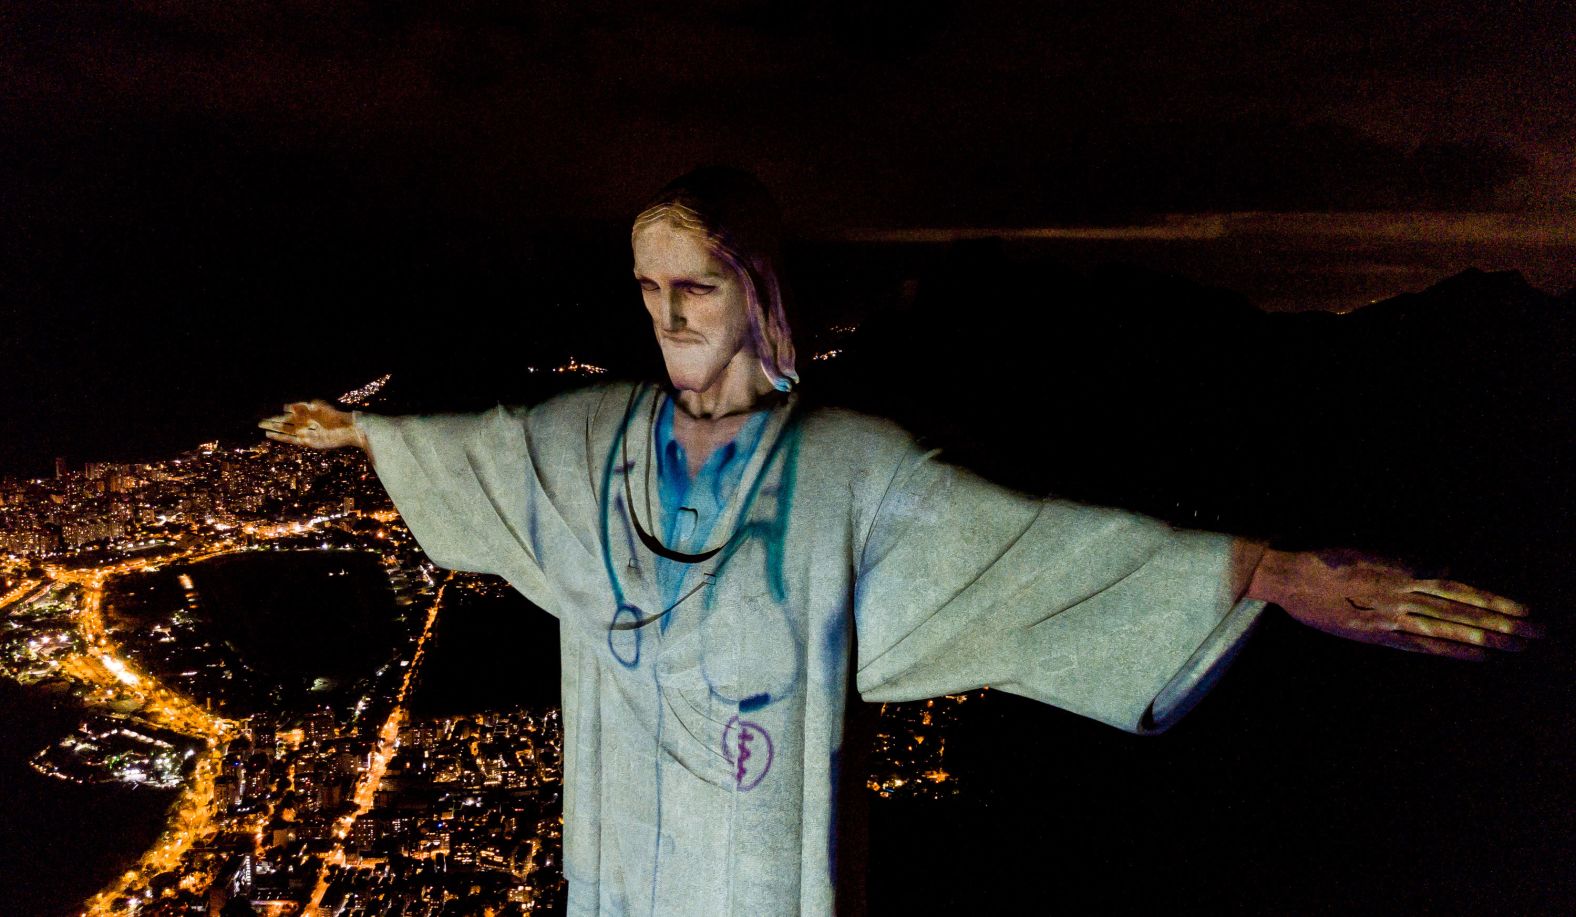 In Rio de Janeiro, the Christ the Redeemer statue was illuminated to make Jesus Christ look like a doctor on April 12.